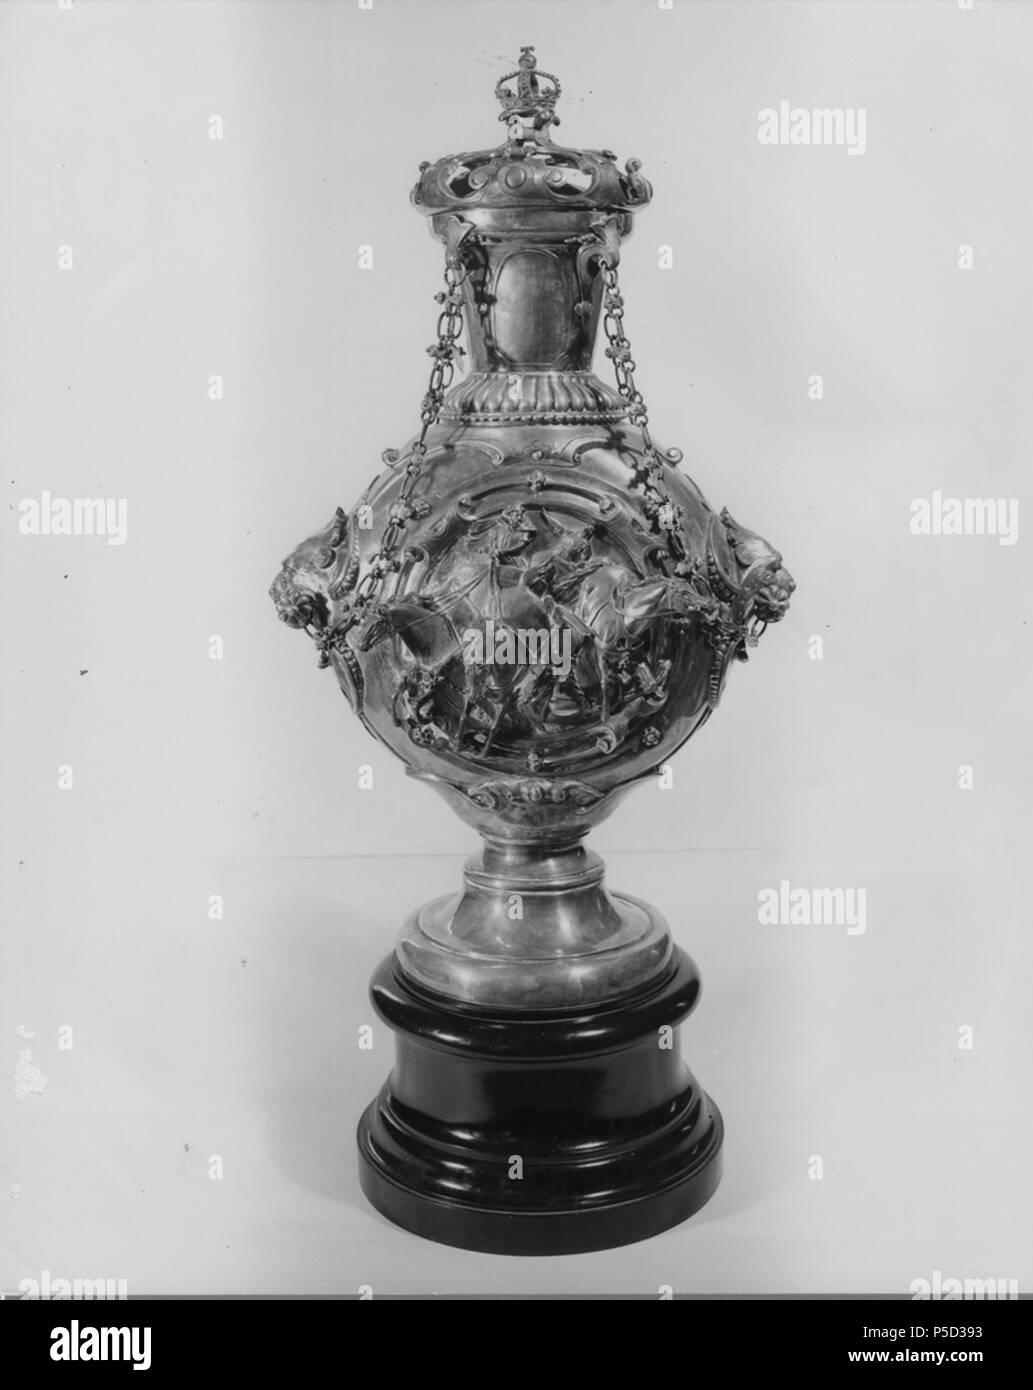 N/A. English: The silver chistening cup given to Prince Albert Edward Kamehameha by Queen Victoria of the United Kingdom. not given. courtesy of Meirie K. Dutton 343 Christening cup of Prince Albert Kamehameha (back) Stock Photo